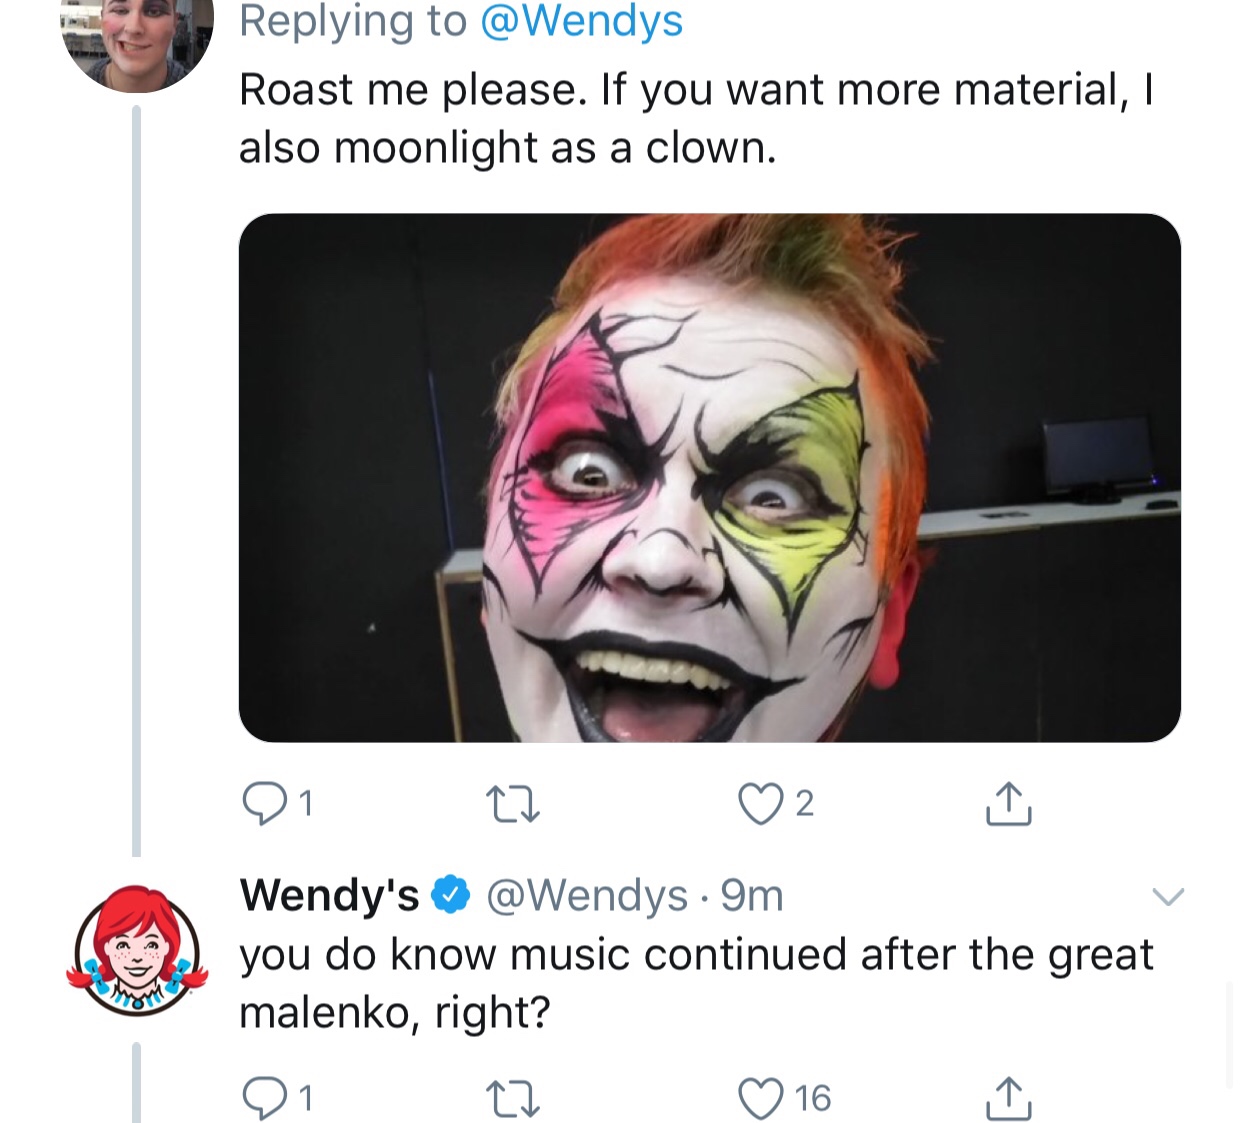 tweet - wendy's company - Roast me please. If you want more material, I also moonlight as a clown. Di 27 02 i Wendy's 9m you do know music continued after the great malenko, right? 0127 16 1